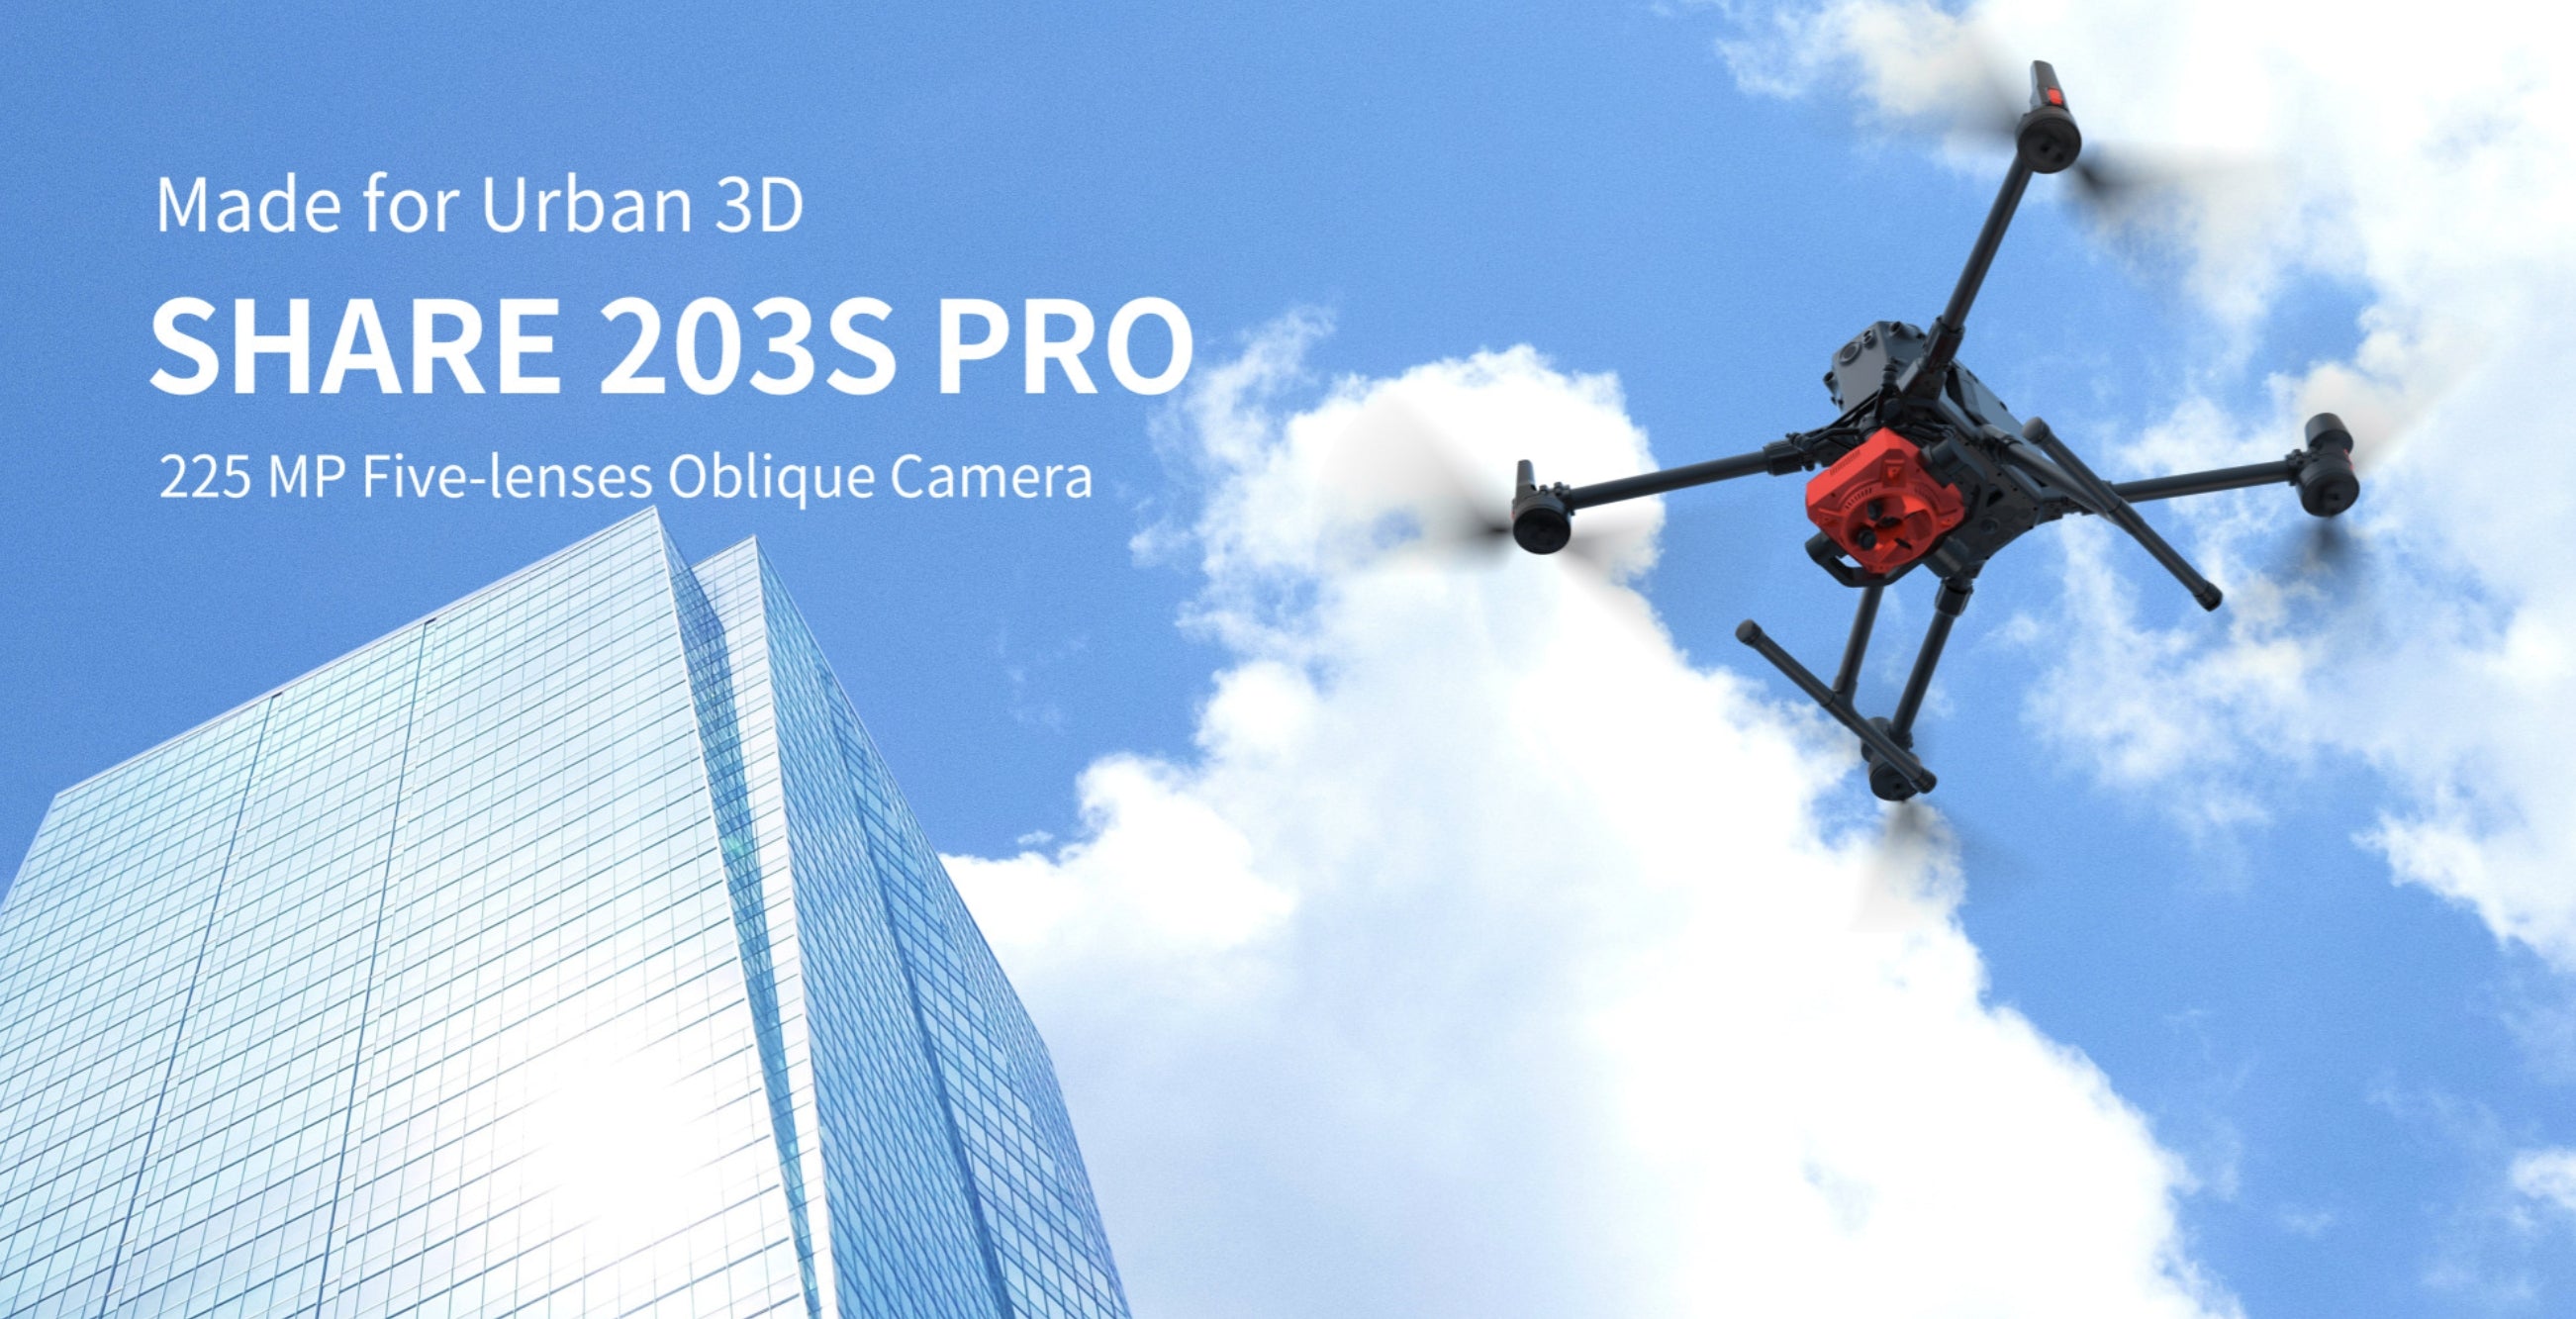 SHARE 203S PRO, High-tech camera for urban 3D mapping, featuring 225MP sensor and multiple oblique lenses.